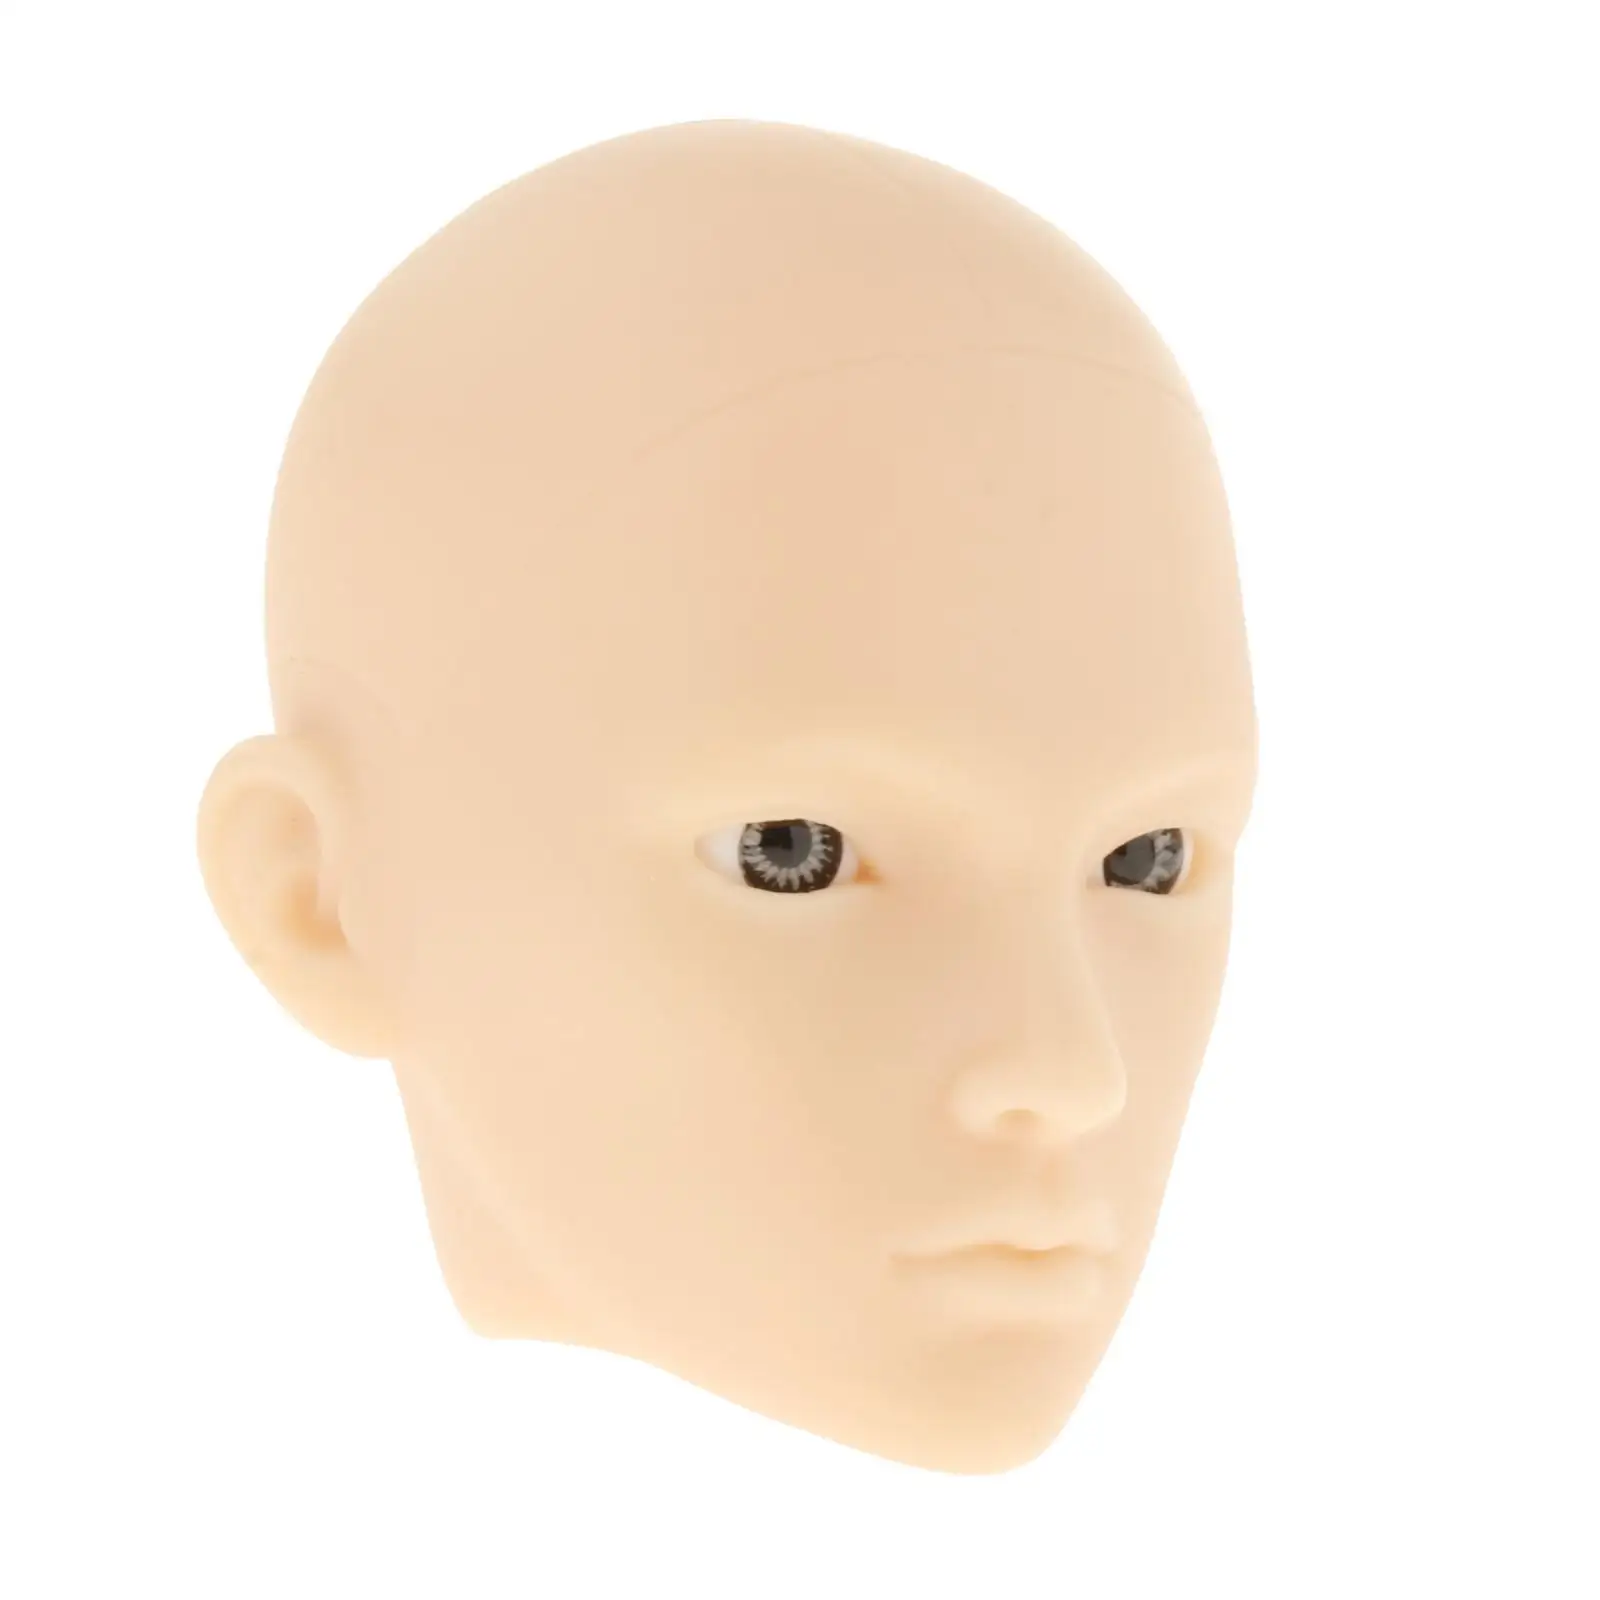 PVC 1/6  Doll Head Mold with Grey Eyes Replacements Repair Accessory